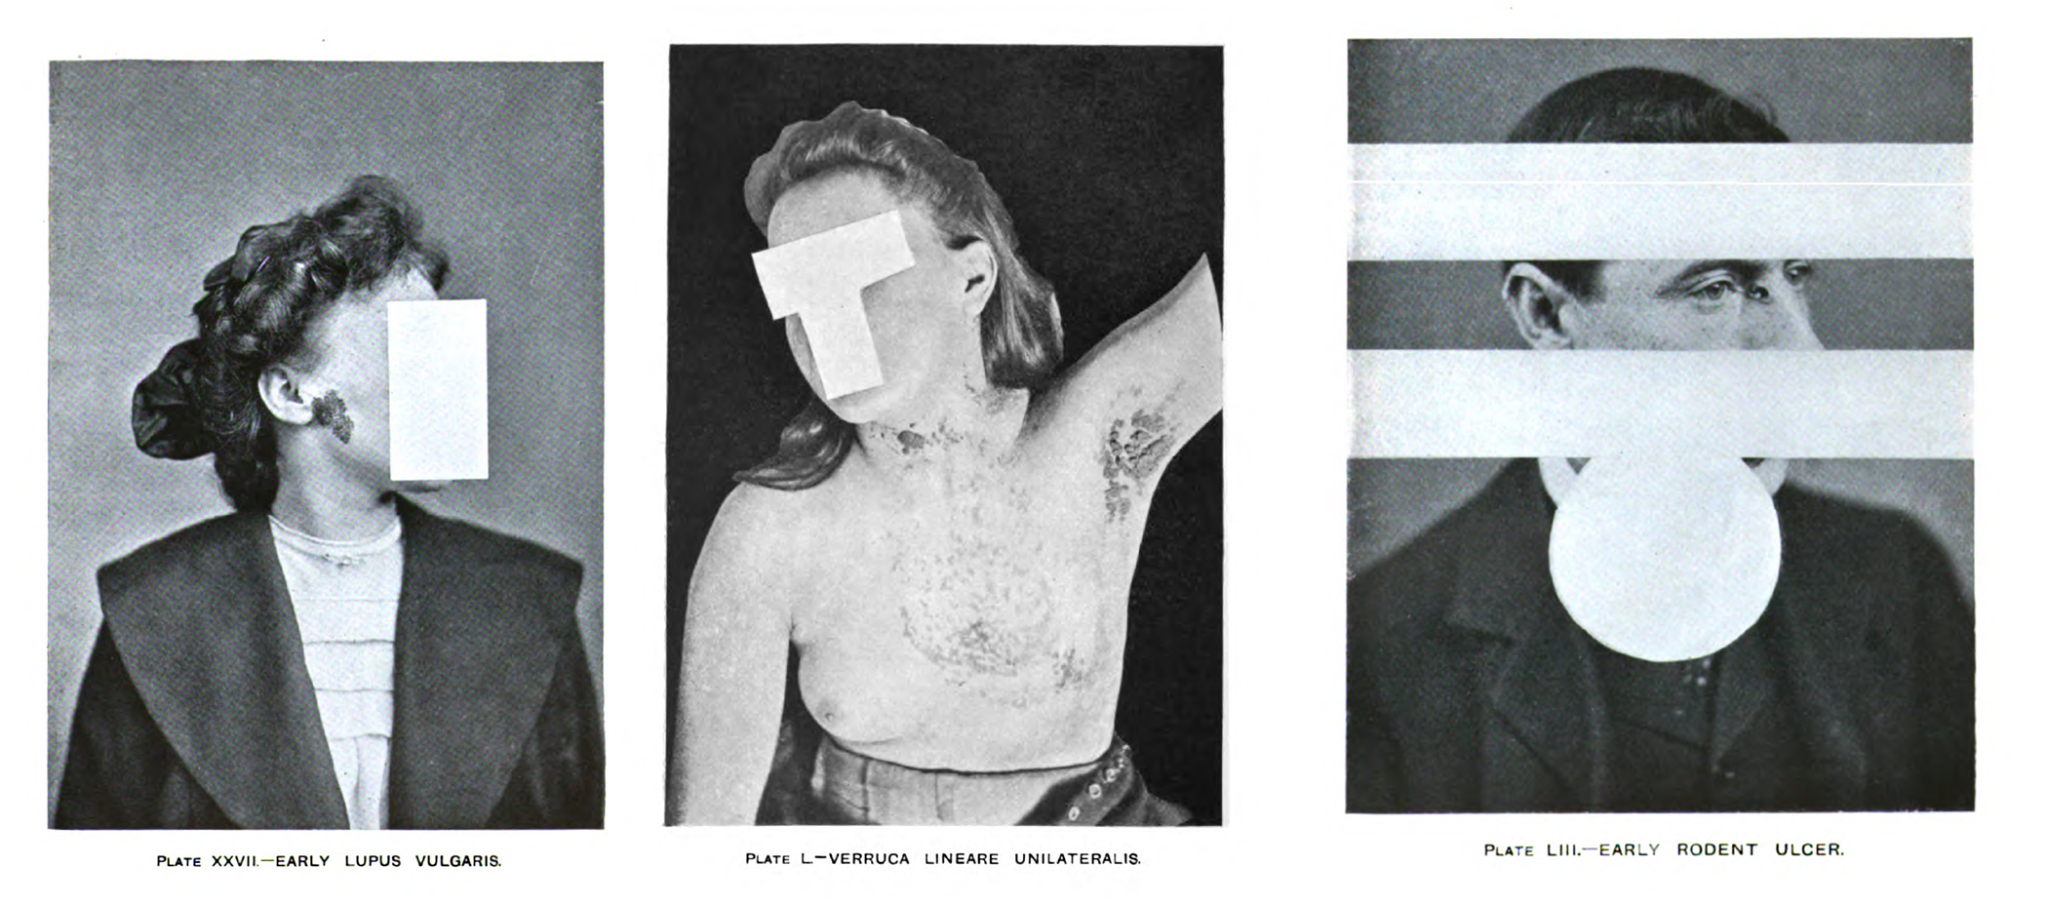 Purcell figure six. Three black and white images of persons with skin conditions have been obscured using white geometric shapes.